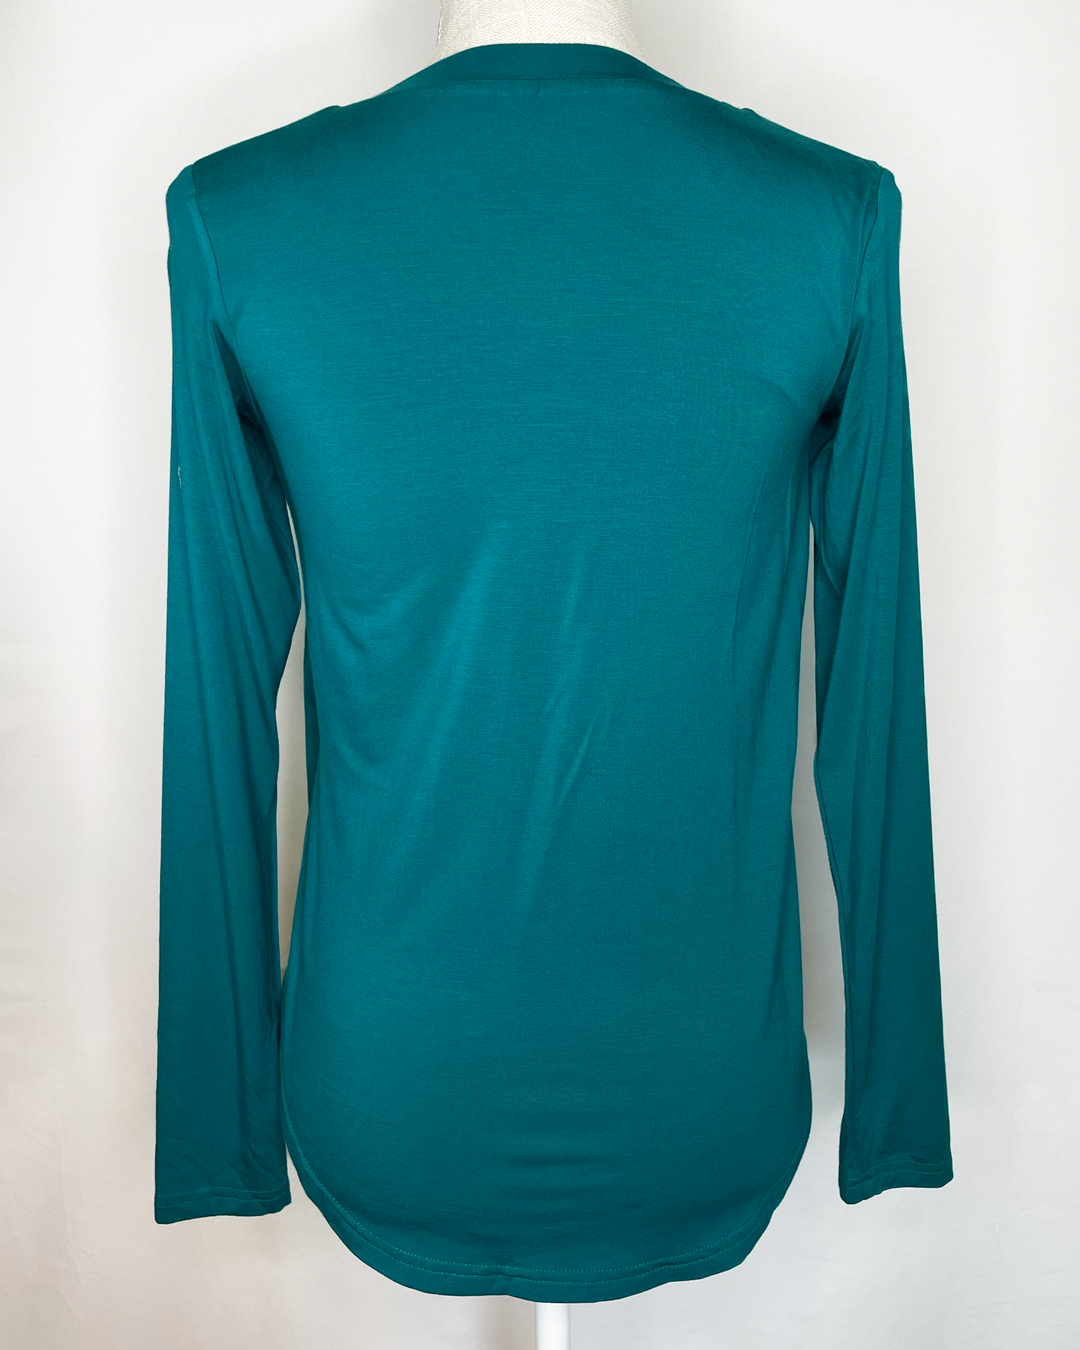 Darci Women's Bamboo Long Sleeve Top in Teal color Back view